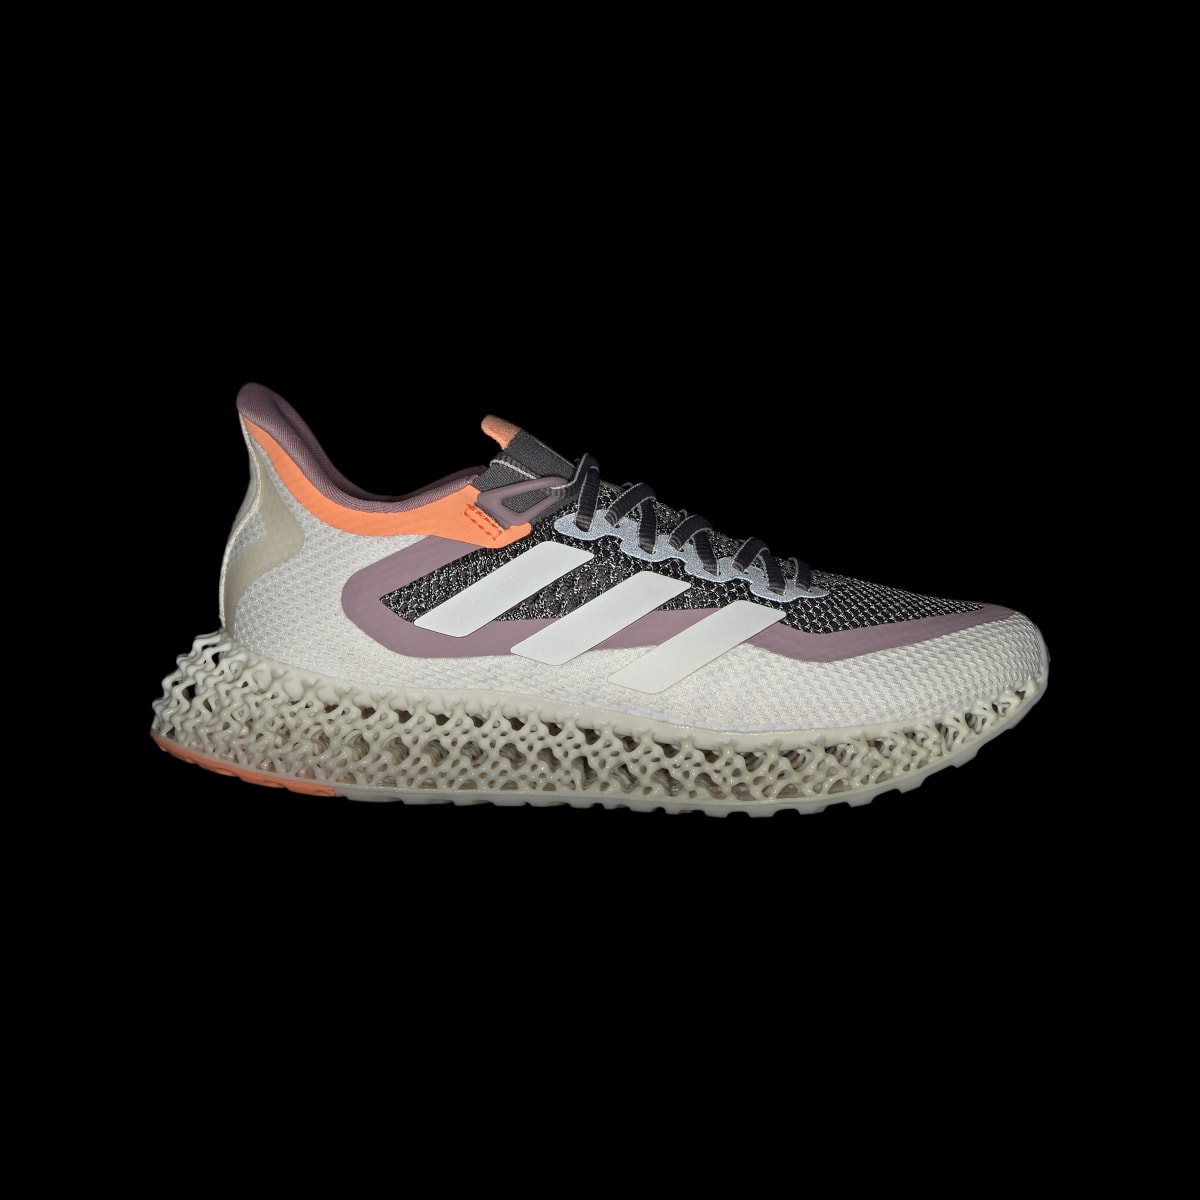 Adidas 4DFWD 2 Running Shoes. 7